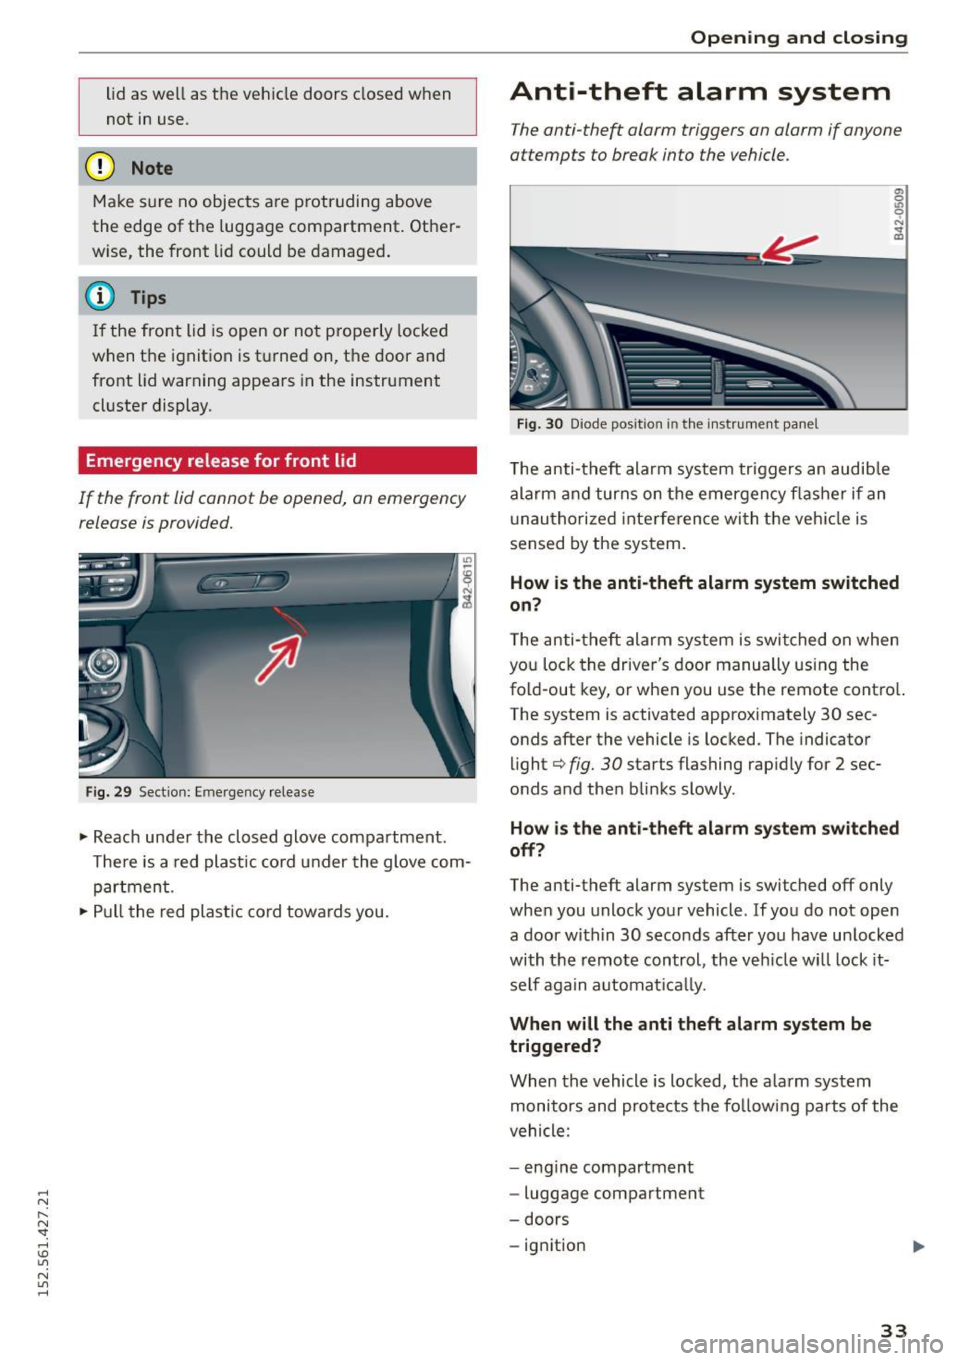 AUDI R8 SPYDER 2015  Owners Manual .... N 
l­
N "1: .... I.O 
" N 
" .... 
lid as  well  as  the  vehicle  doors  closed  when 
not  in use. 
(D Note 
Make sure  no  objects  are  p rotruding  above 
the  edge  of the  luggage  com